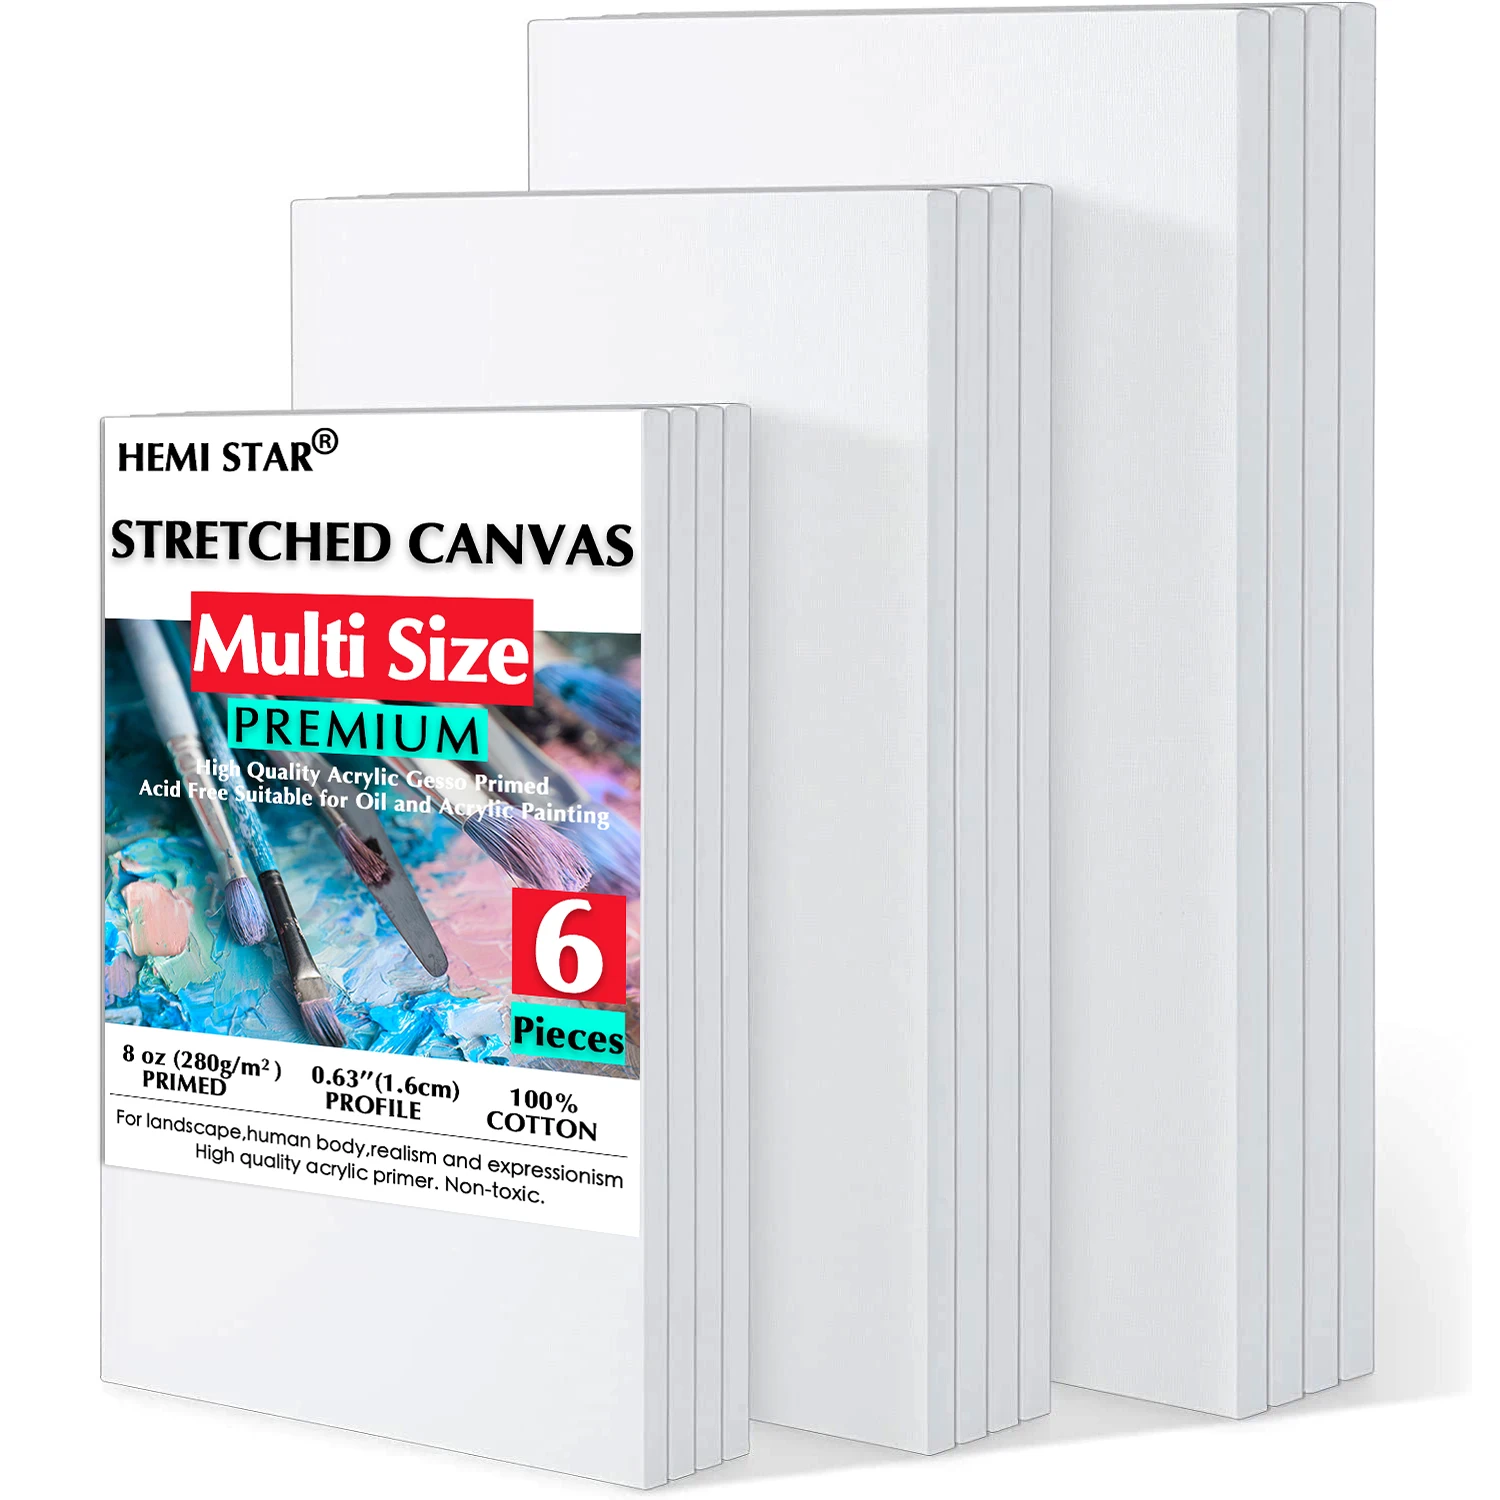 6 pcs/Set Stretched Canvases for Painting Primed White 100% Cotton Artist Blank Canvas Boards for Painting 8 oz Gesso-Primed